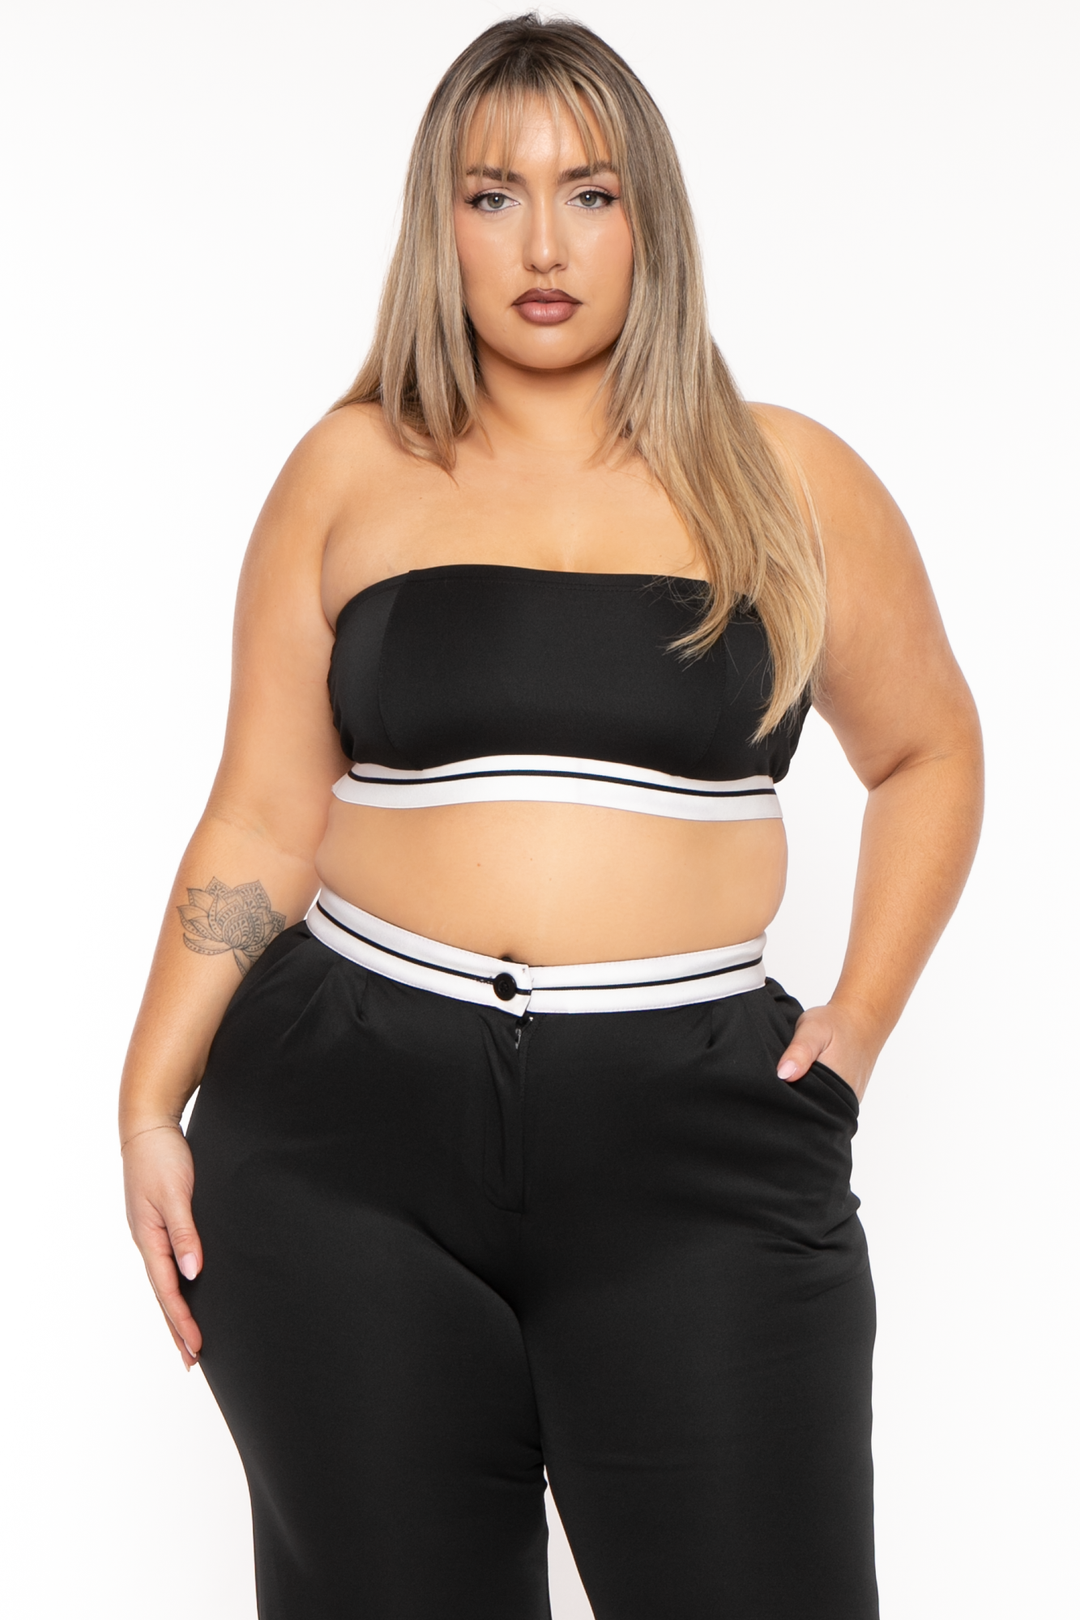 CHICCTHY TOP Matching Sets Plus Size Parisa Sporty  Matching Set-Black